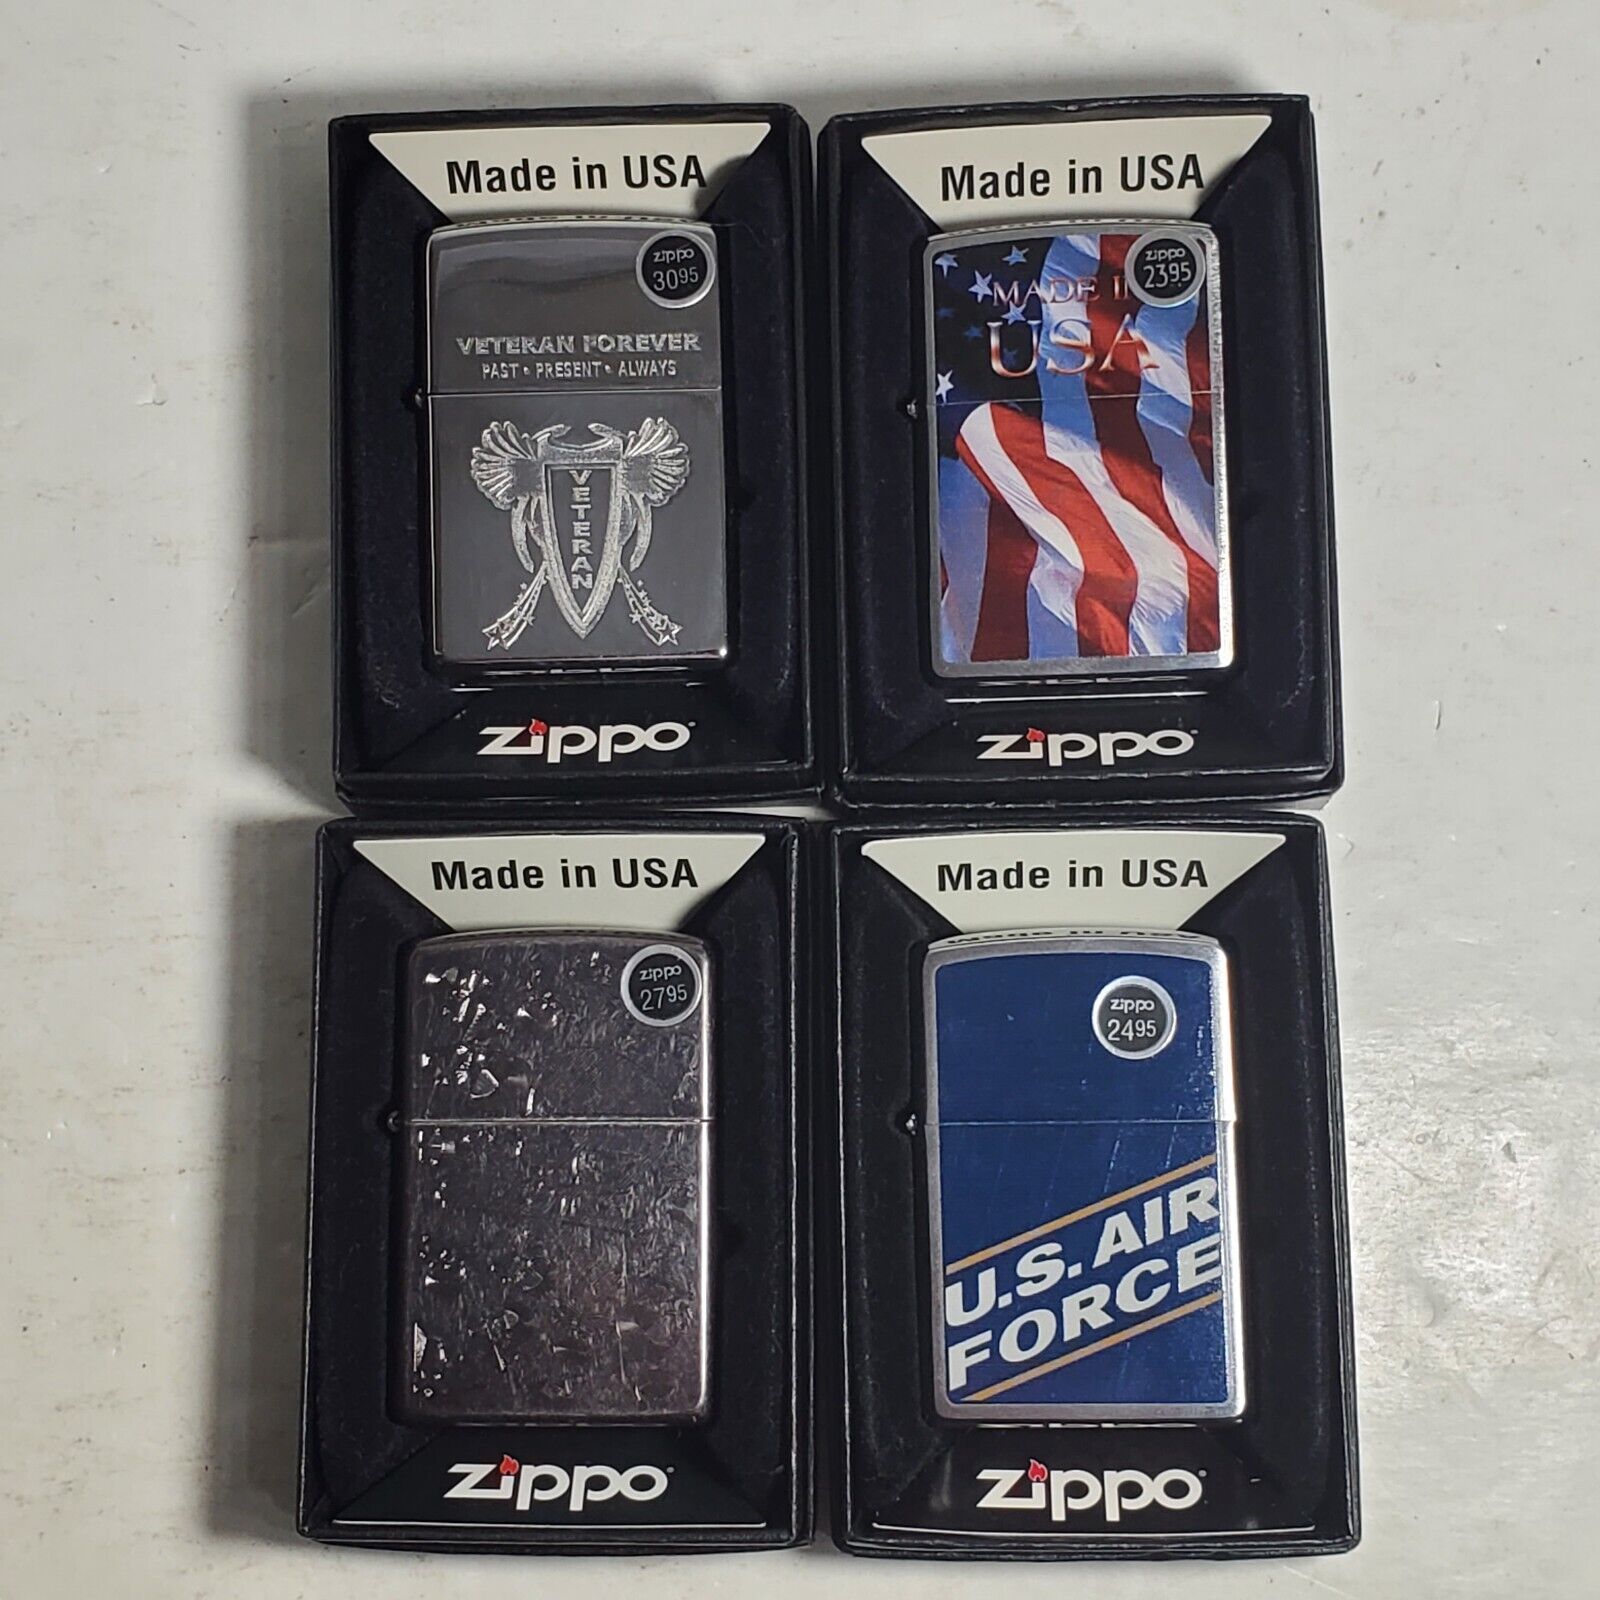 LOT OF 4 ZIPPO LIGHTERS  MADE IN U.S.A. IN BOX UNUSED 